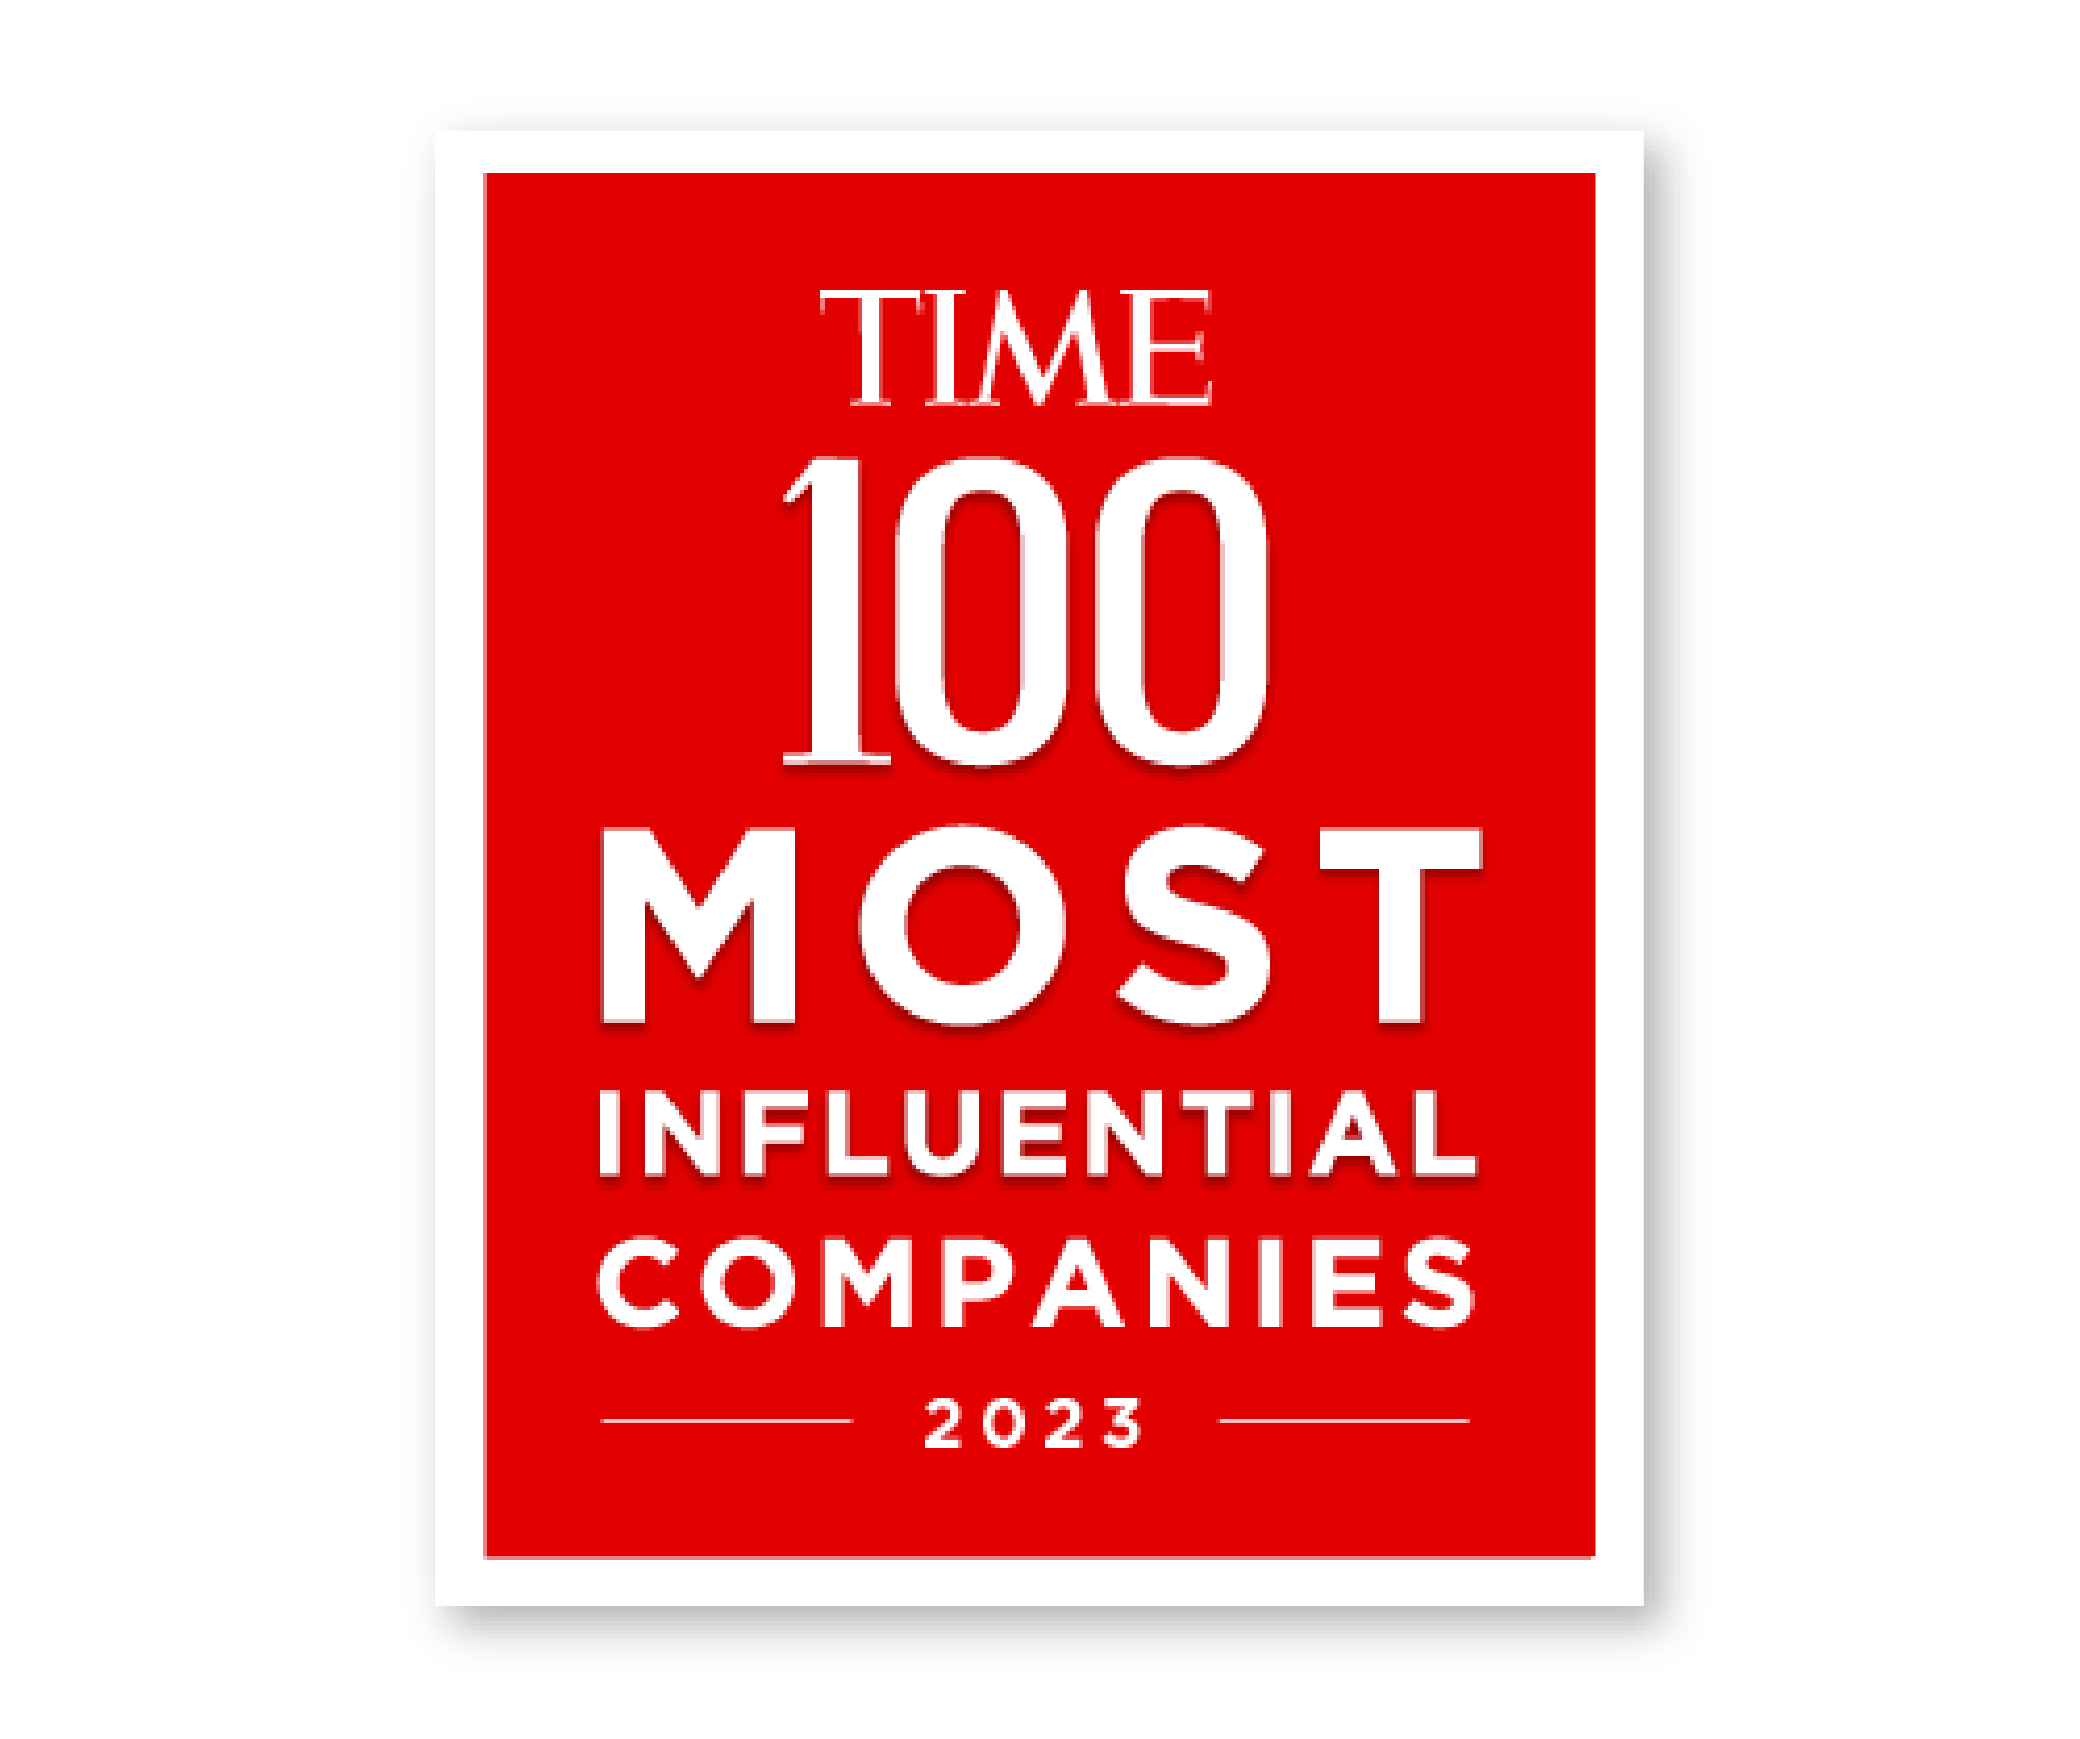 TIME100 MOST INFLUENTIAL COMPANIES 2023 TIME